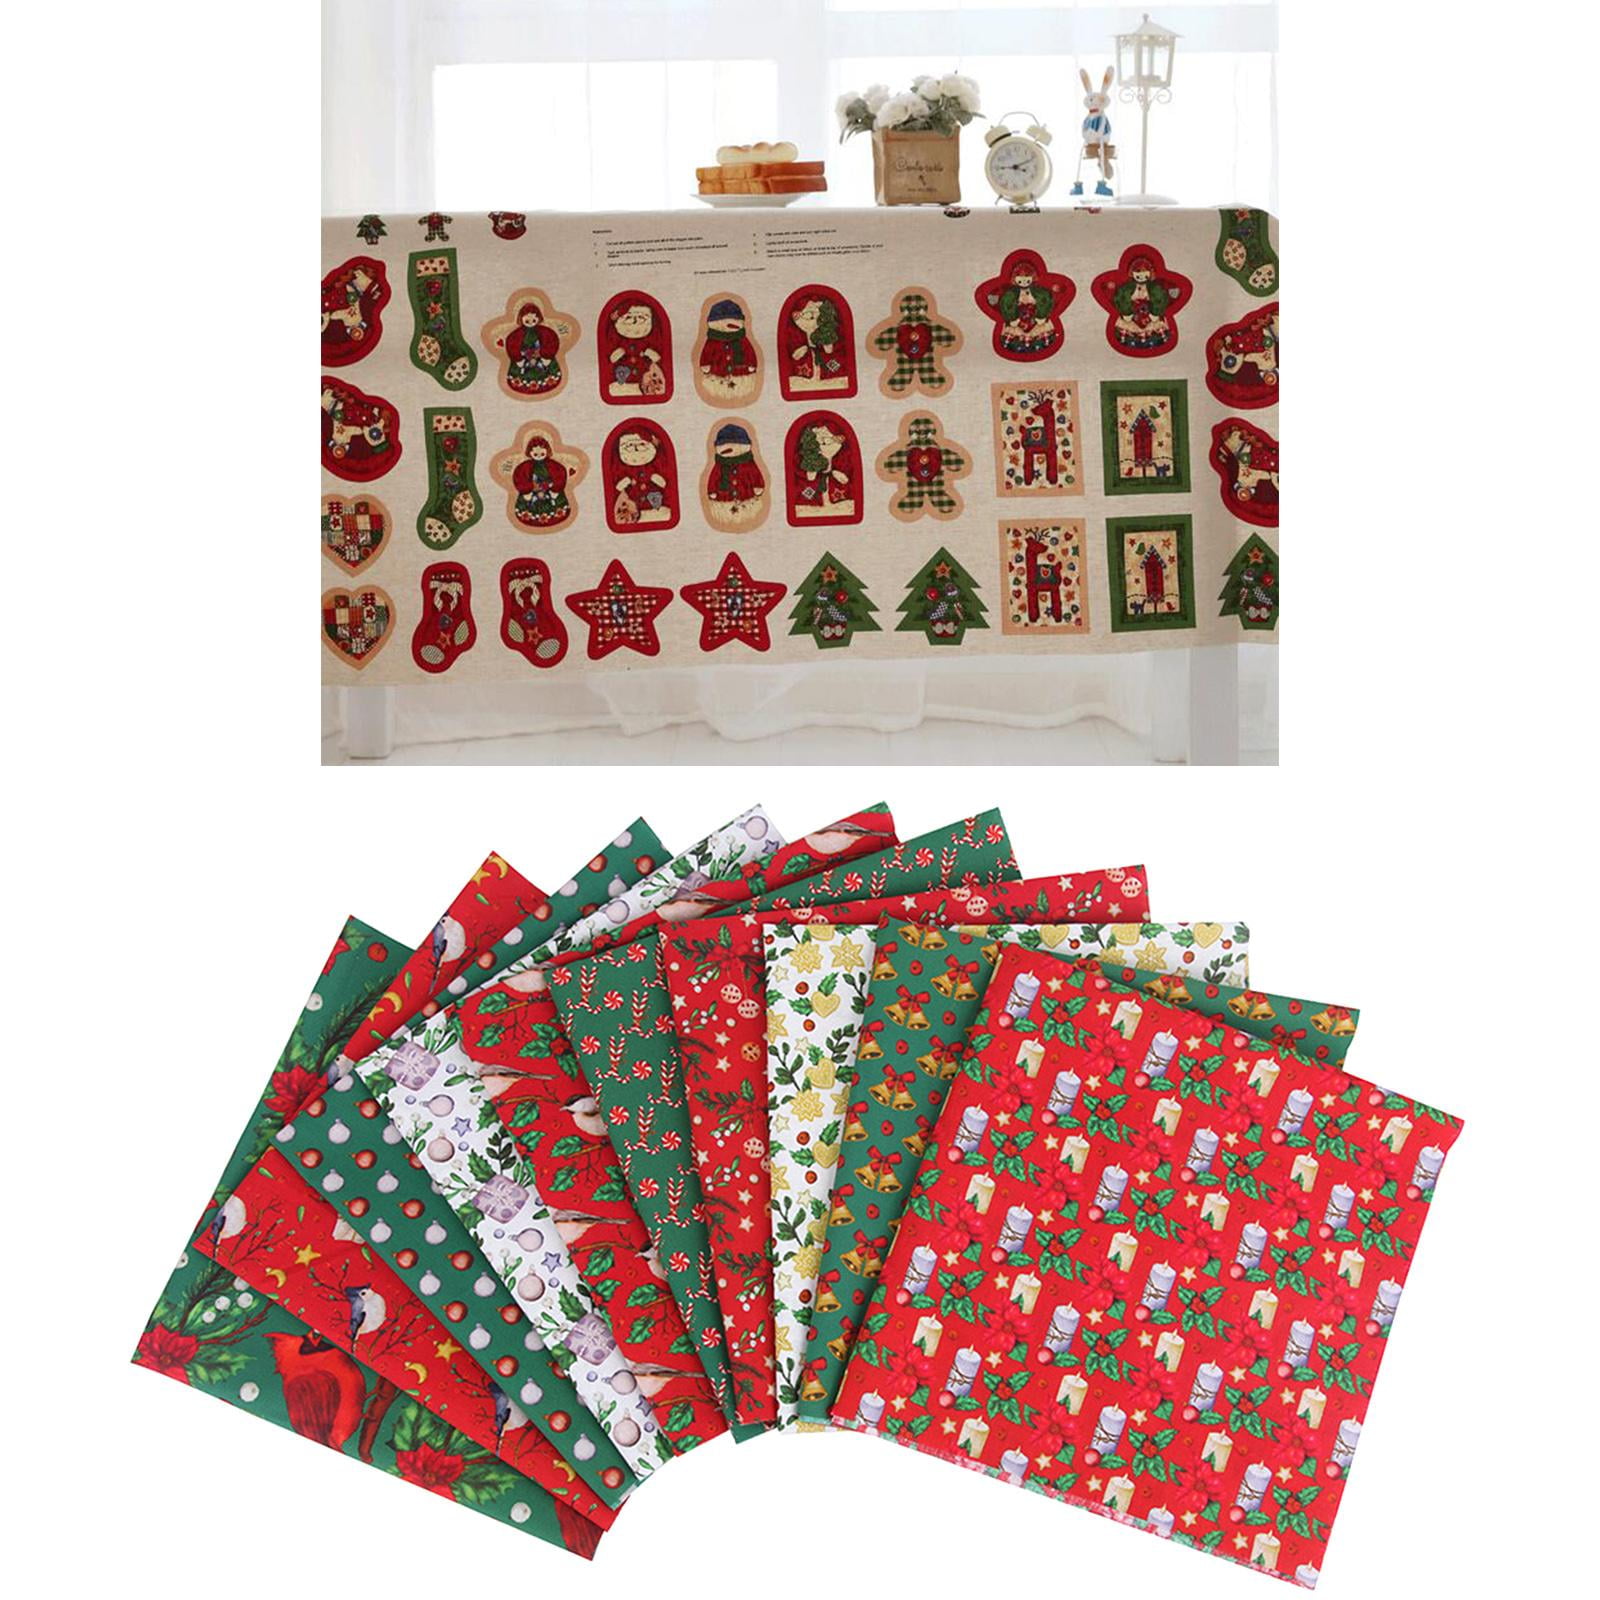 Irenare 50 Pieces Christmas Cotton Fabric Square Quilting Fabric Squares Bundle Sewing Quilting Craft 10 Different Christmas Patterns Patchwork for